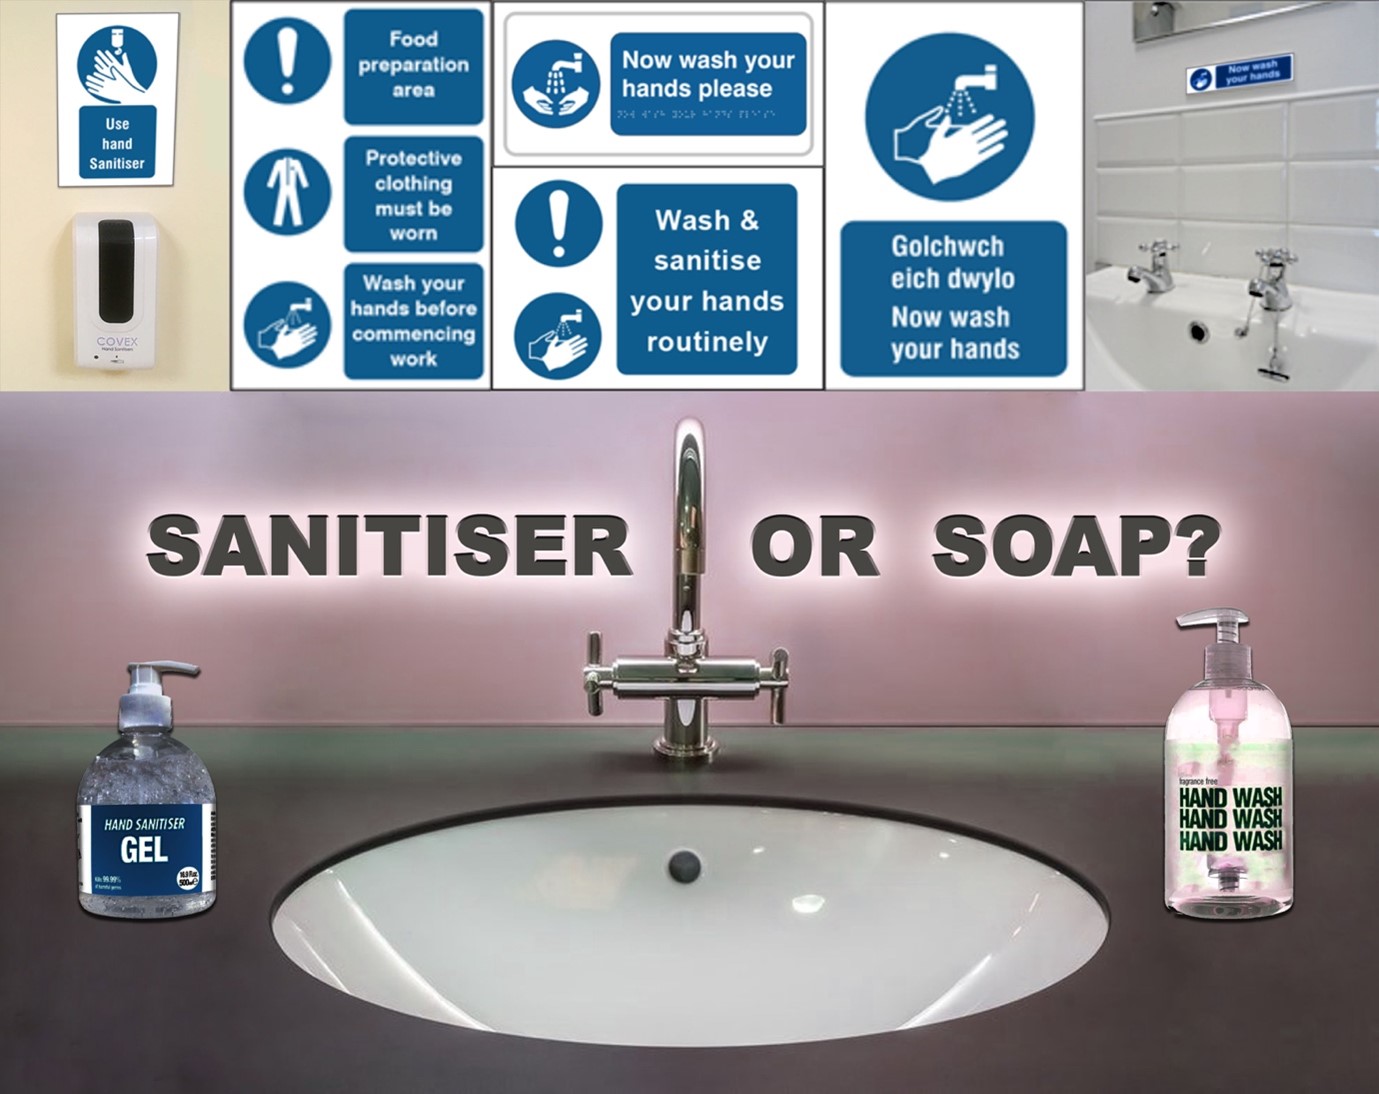 image of hand sanitisation stations and signs